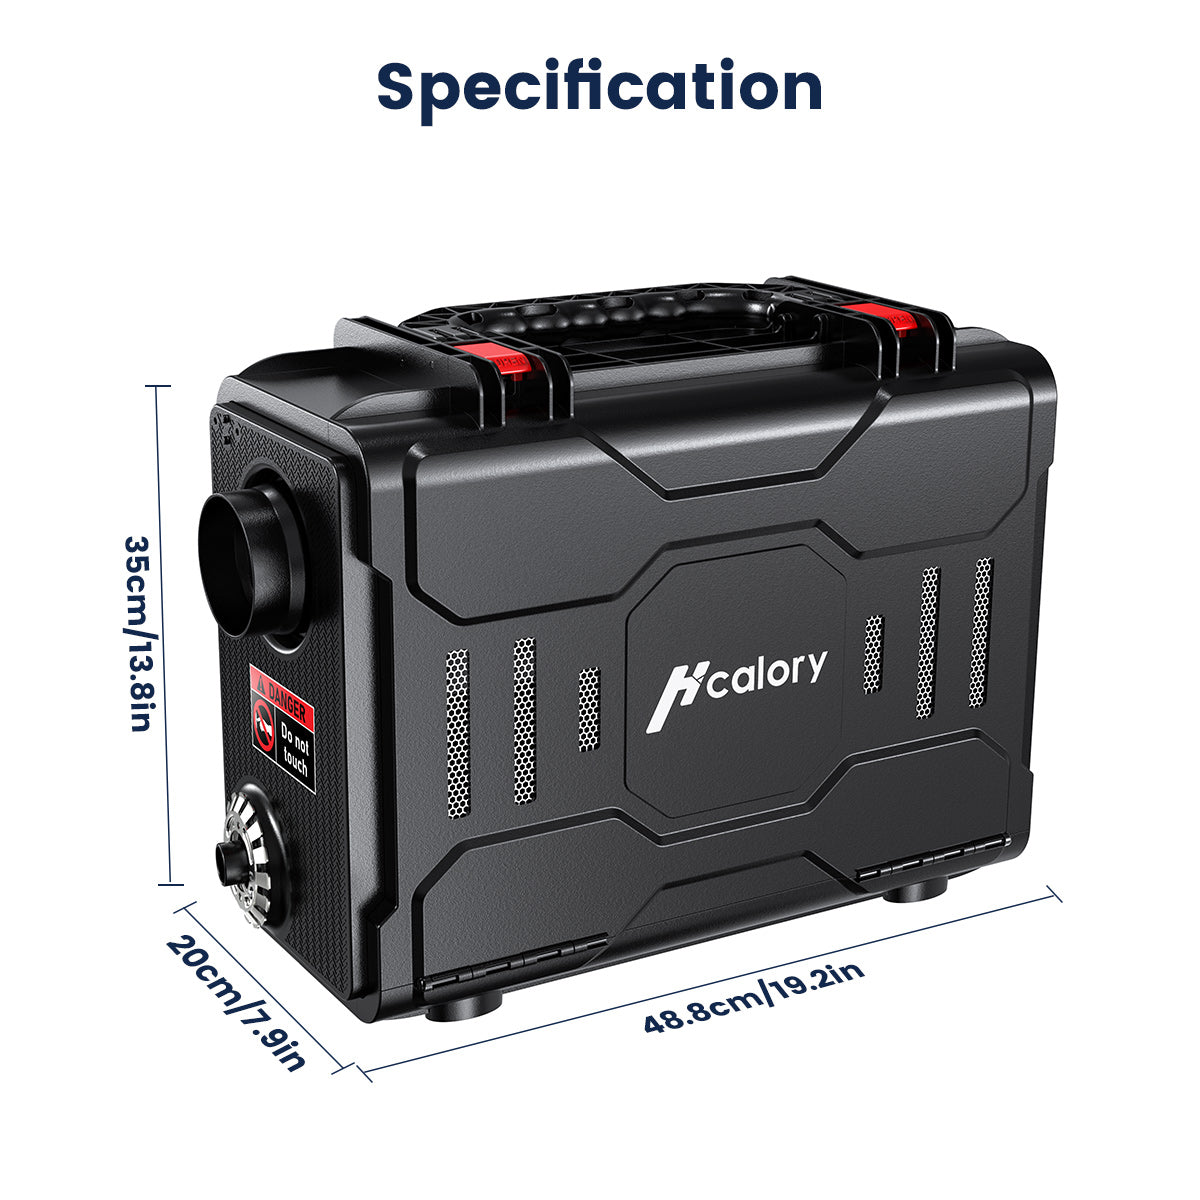 Hcalory-HC-A01-Diesel-Heater-5L-Handheld-Toolbox-All-In-One -back-Specification